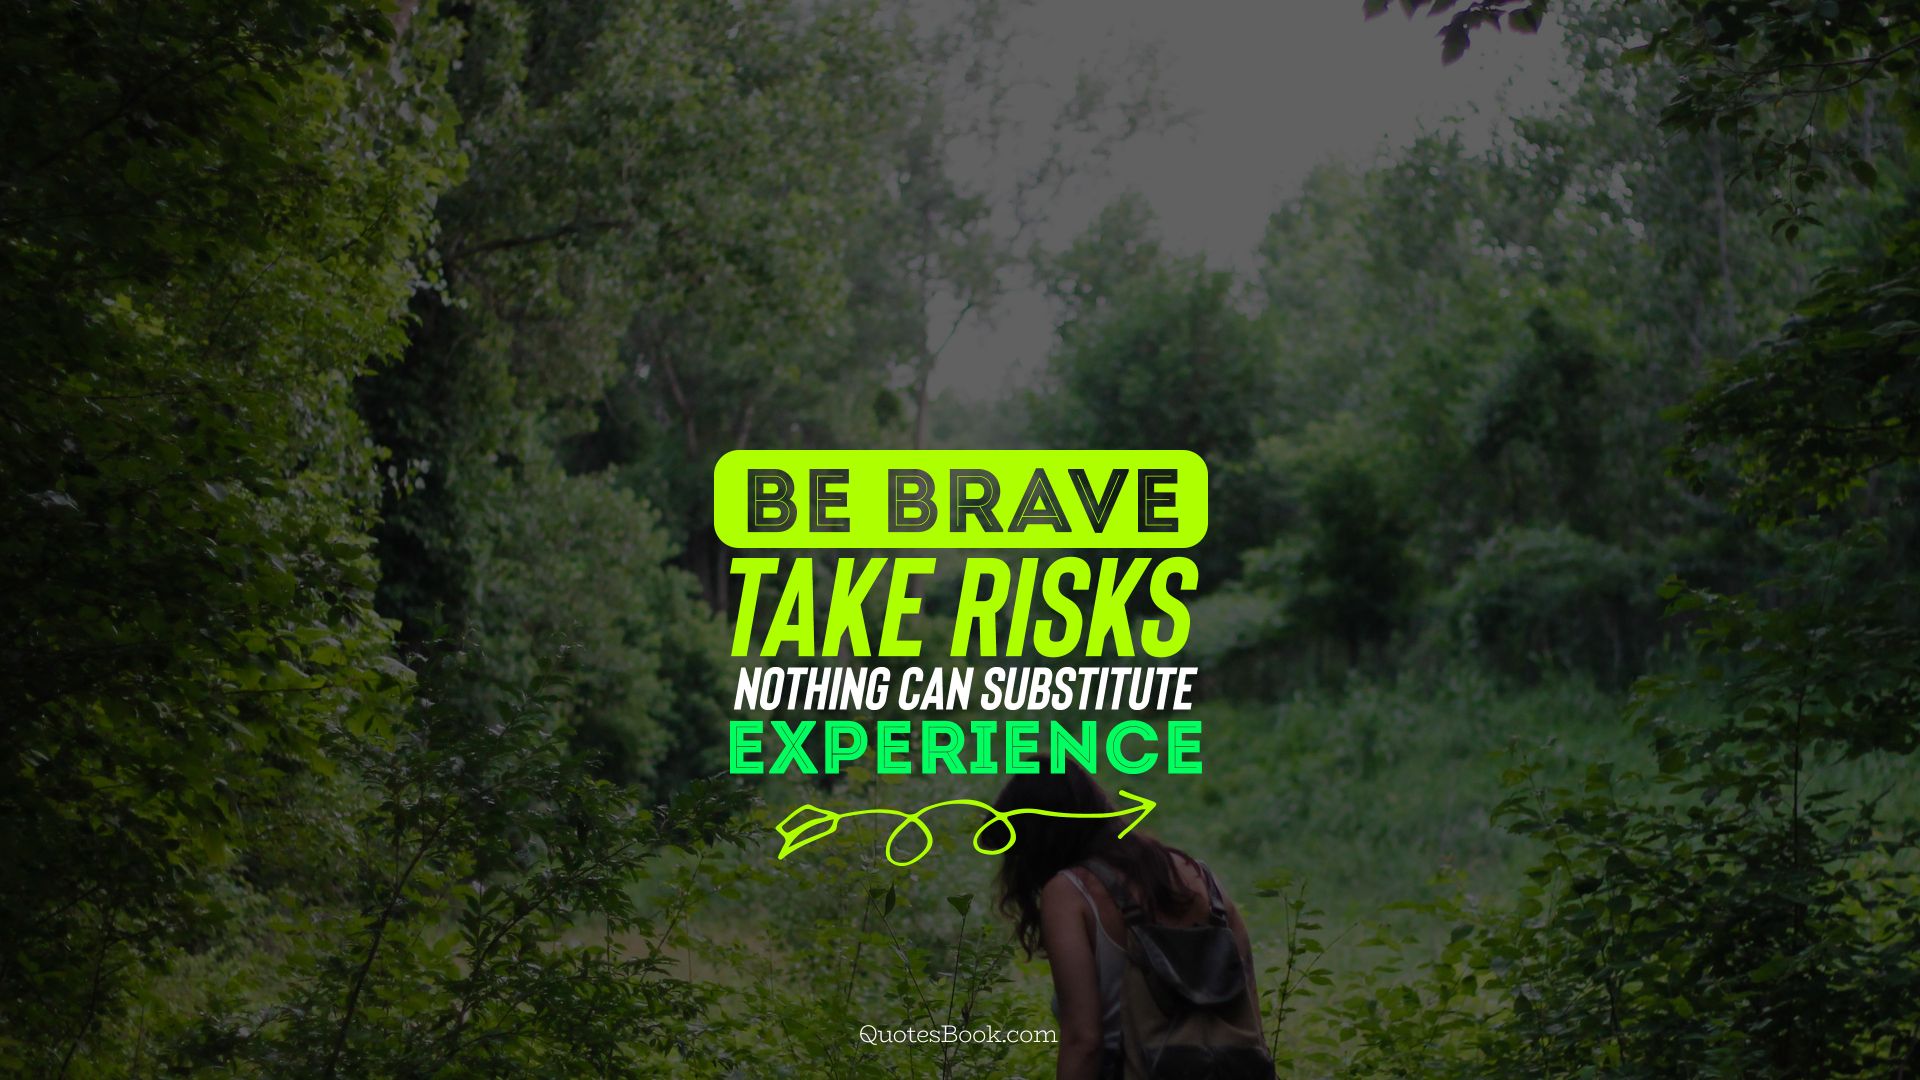 Be brave take risks nothing can substitute experience